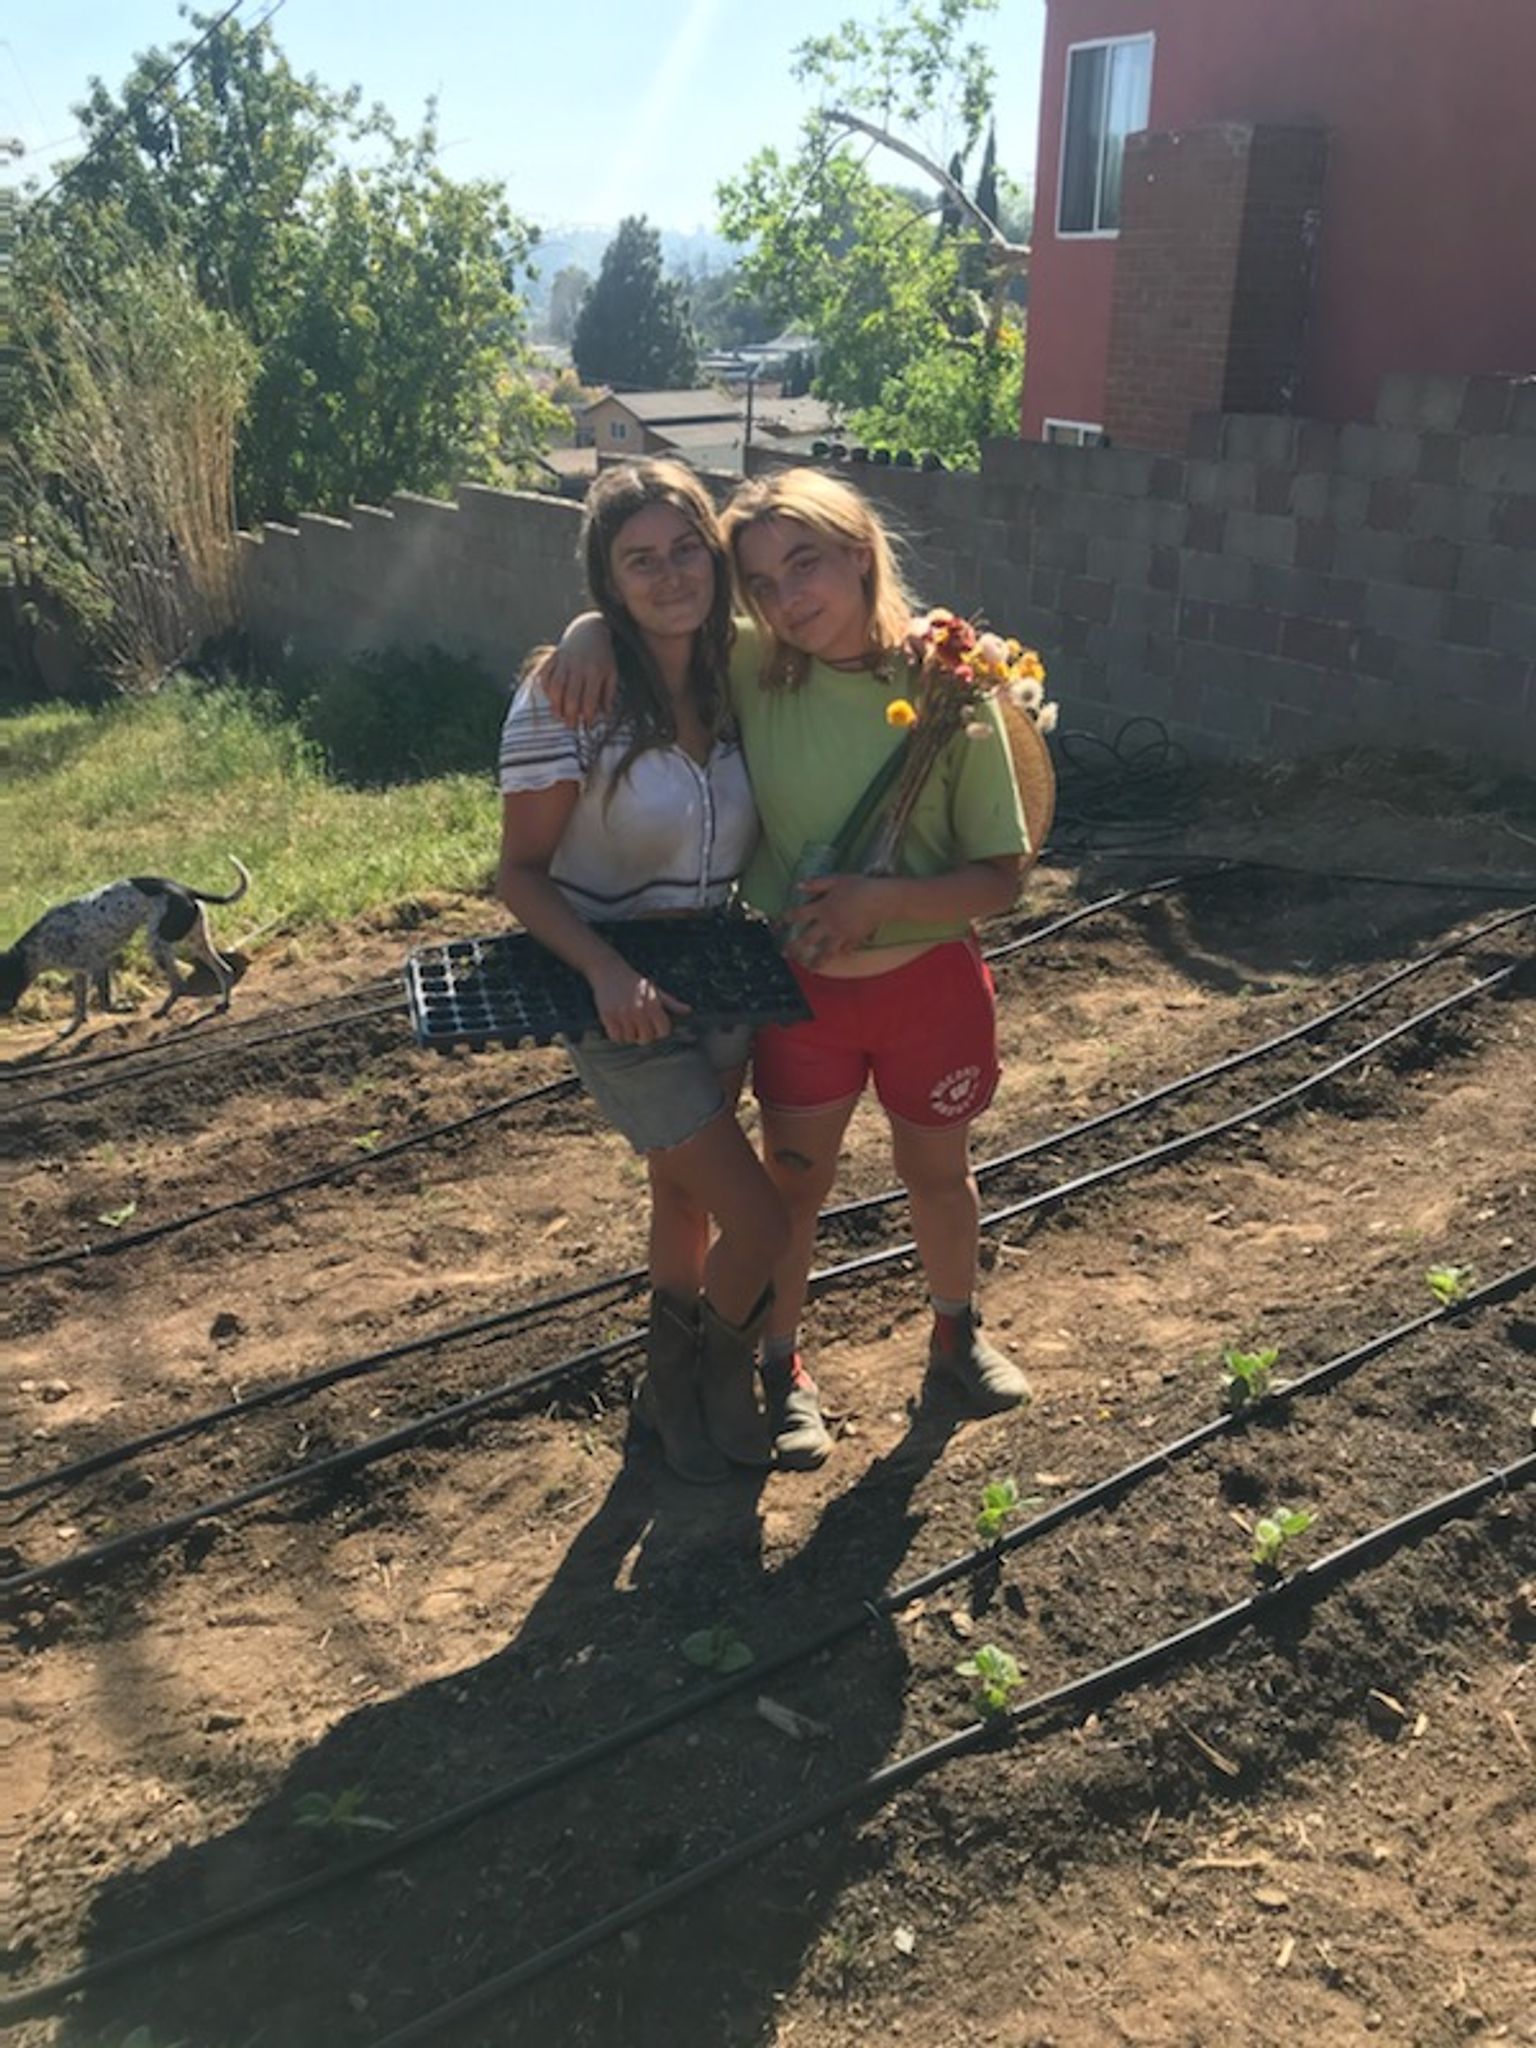 Two people standing between garden rows of soil, holding a seedling tray and onions